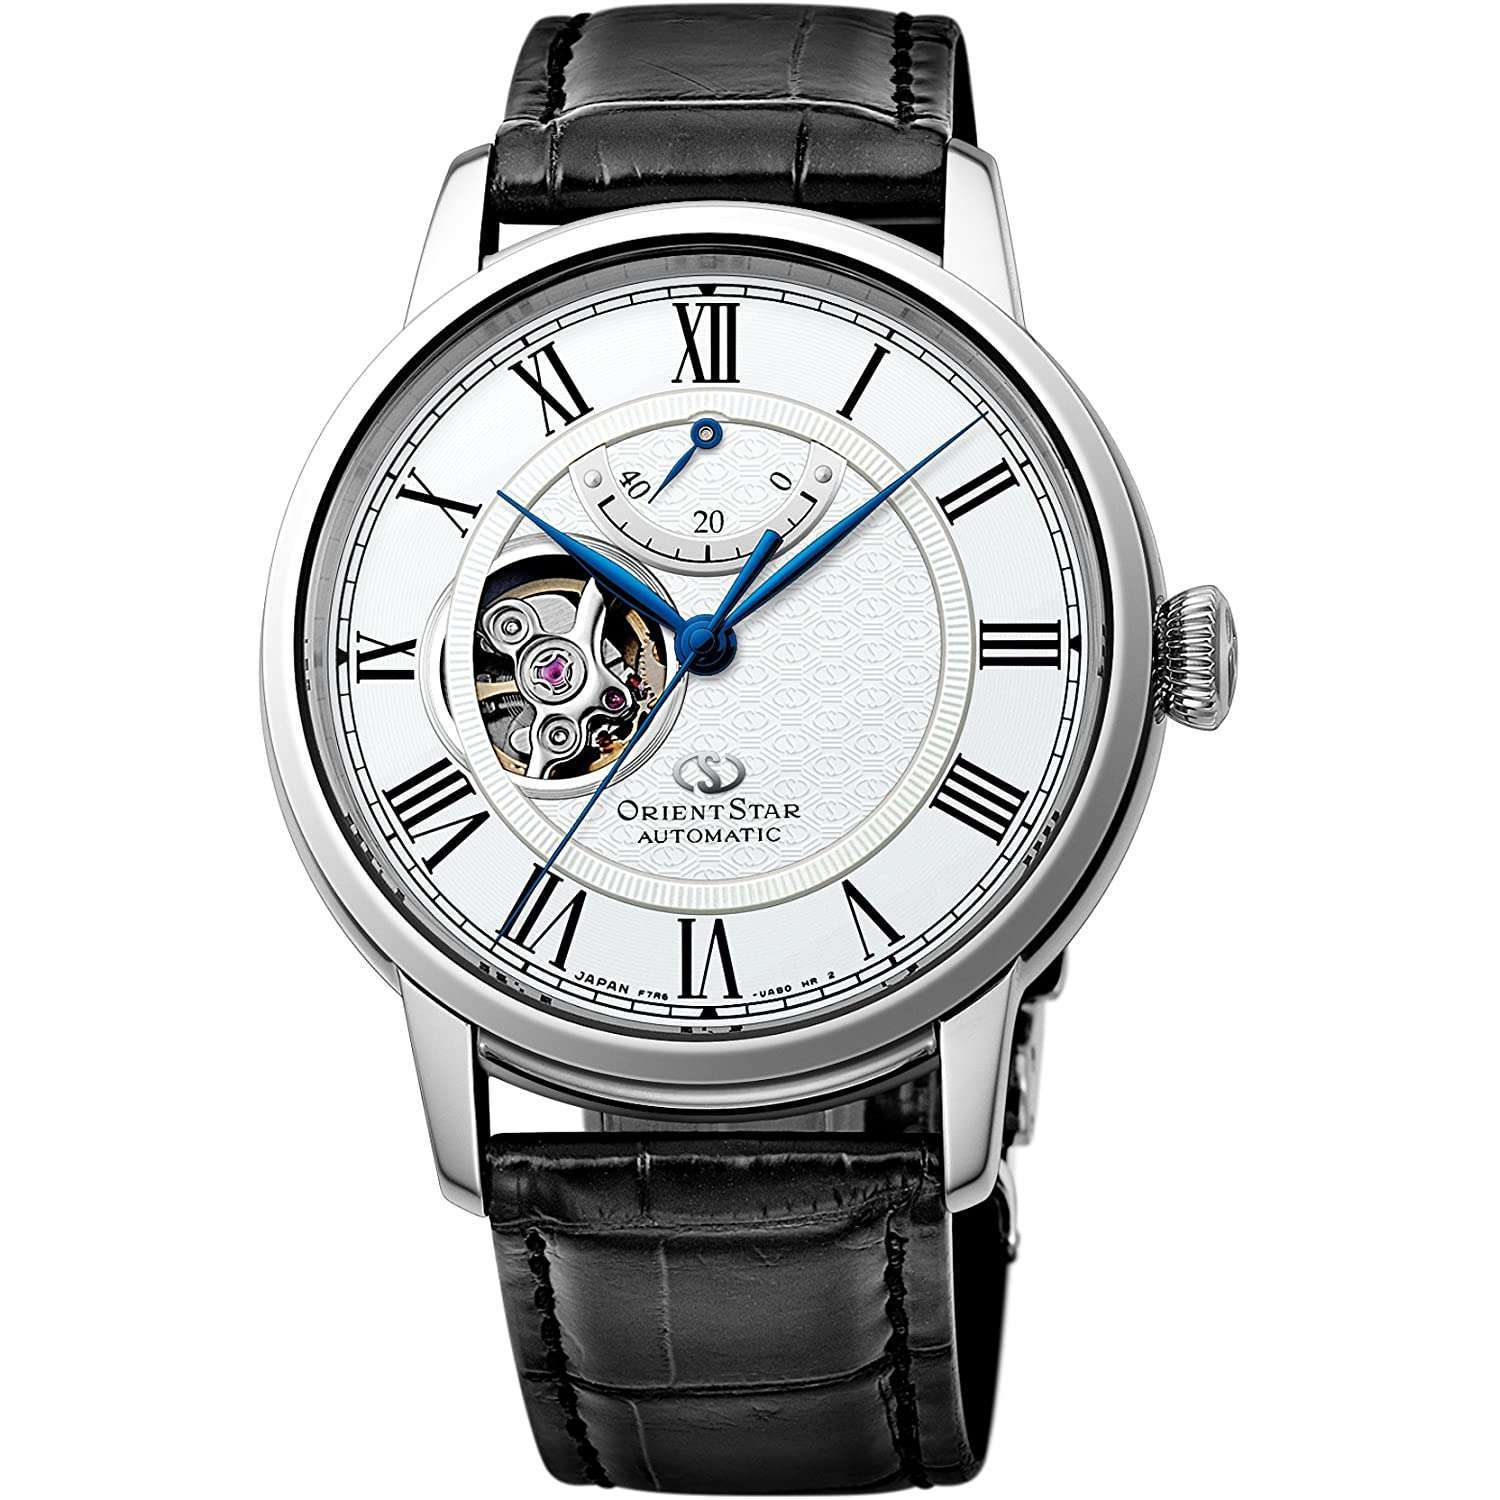 ORIENT STAR CLASSIC COLLECTION SEMI SKELETON (CLASSIC) MEN WATCH RK-HH0001S - ROOK JAPAN